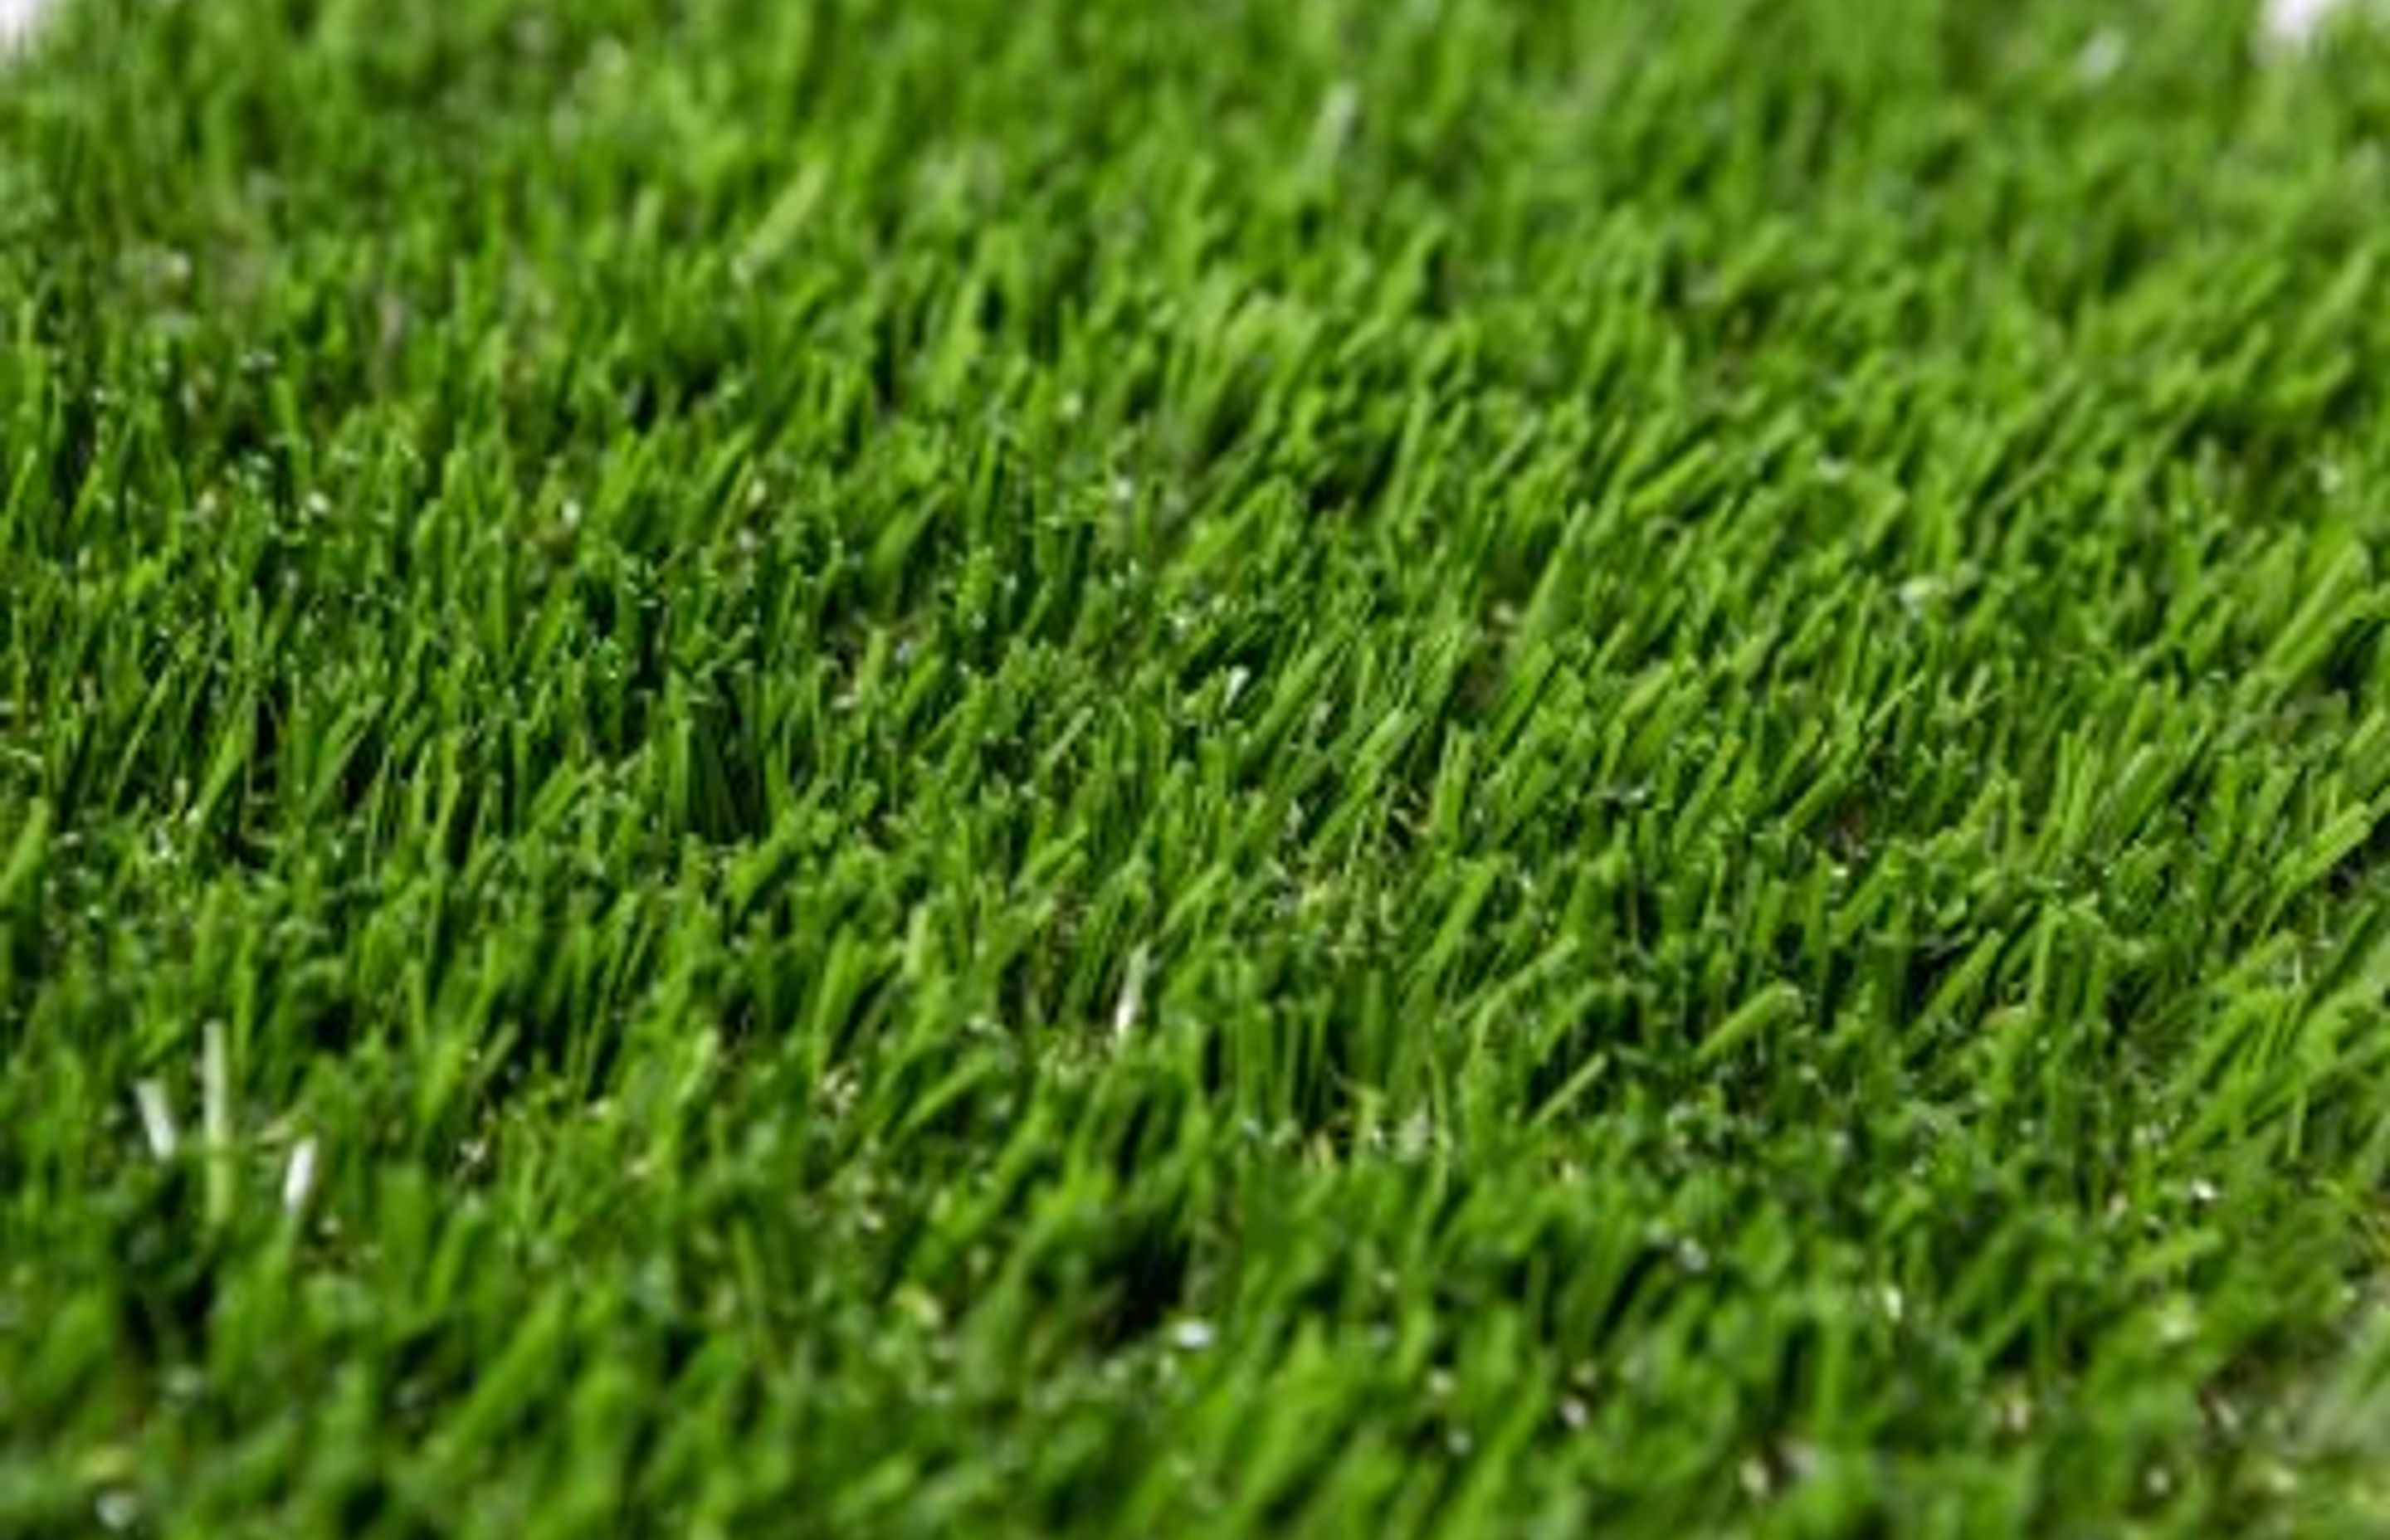 The Best Artificial Turf for Football